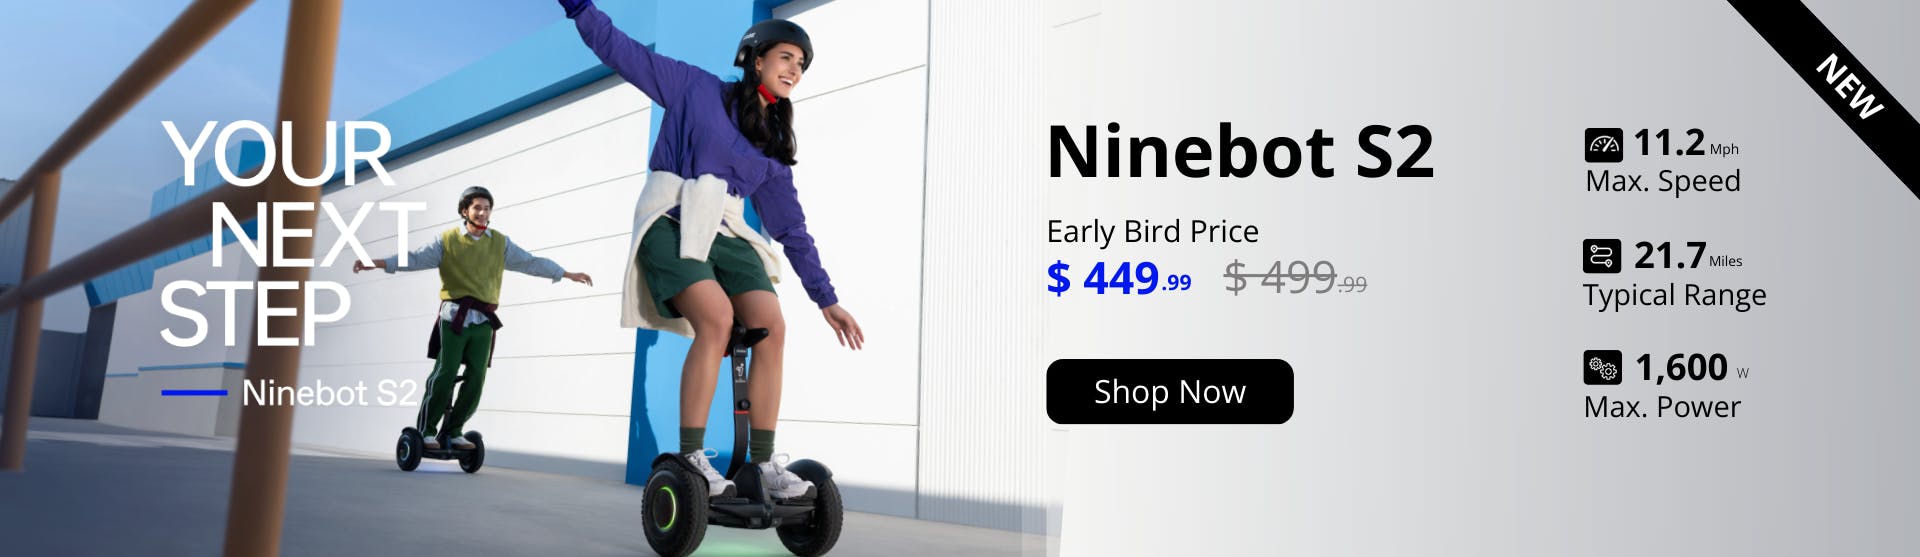 Segway Ninebot S – One Stop Board Shop